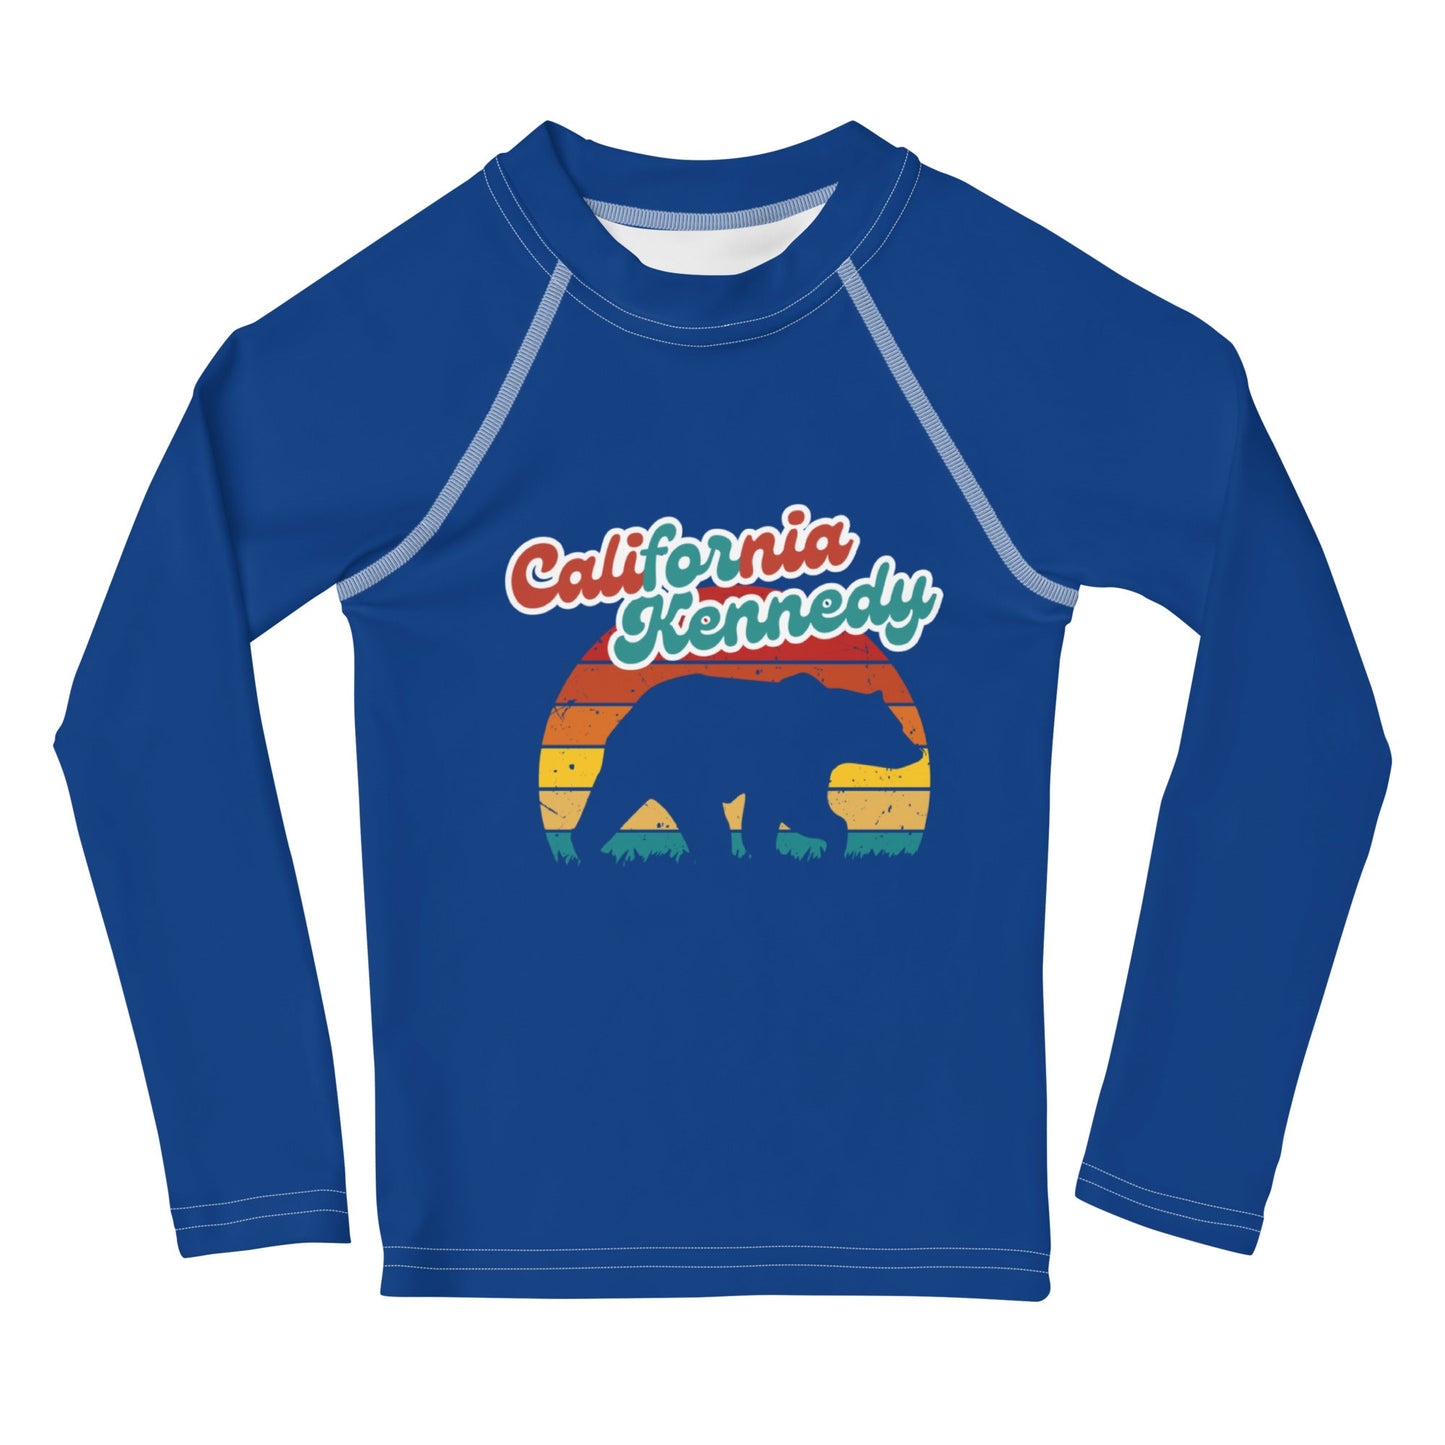 Califronia for Kennedy Bear Kids Rash Guard - TEAM KENNEDY. All rights reserved